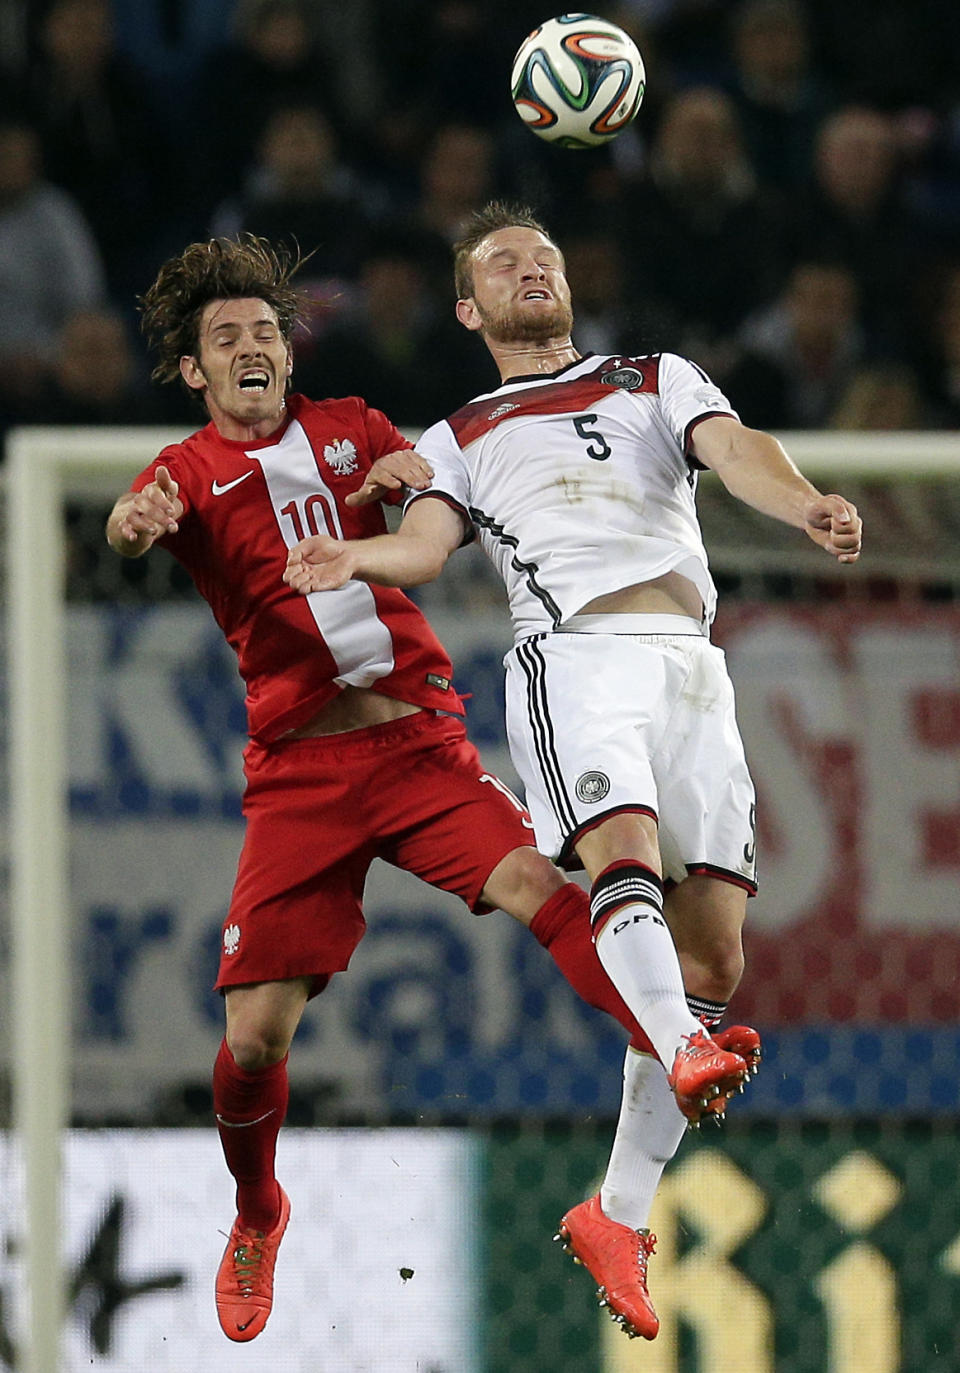 Germany's Shkodran Mustafi, right, and Poland's Ludovic Obraniak, left, challenge for the ball during a friendly soccer match between Germany and Poland in Hamburg, Germany, Tuesday, May 13, 2014. (AP Photo/Michael Sohn)